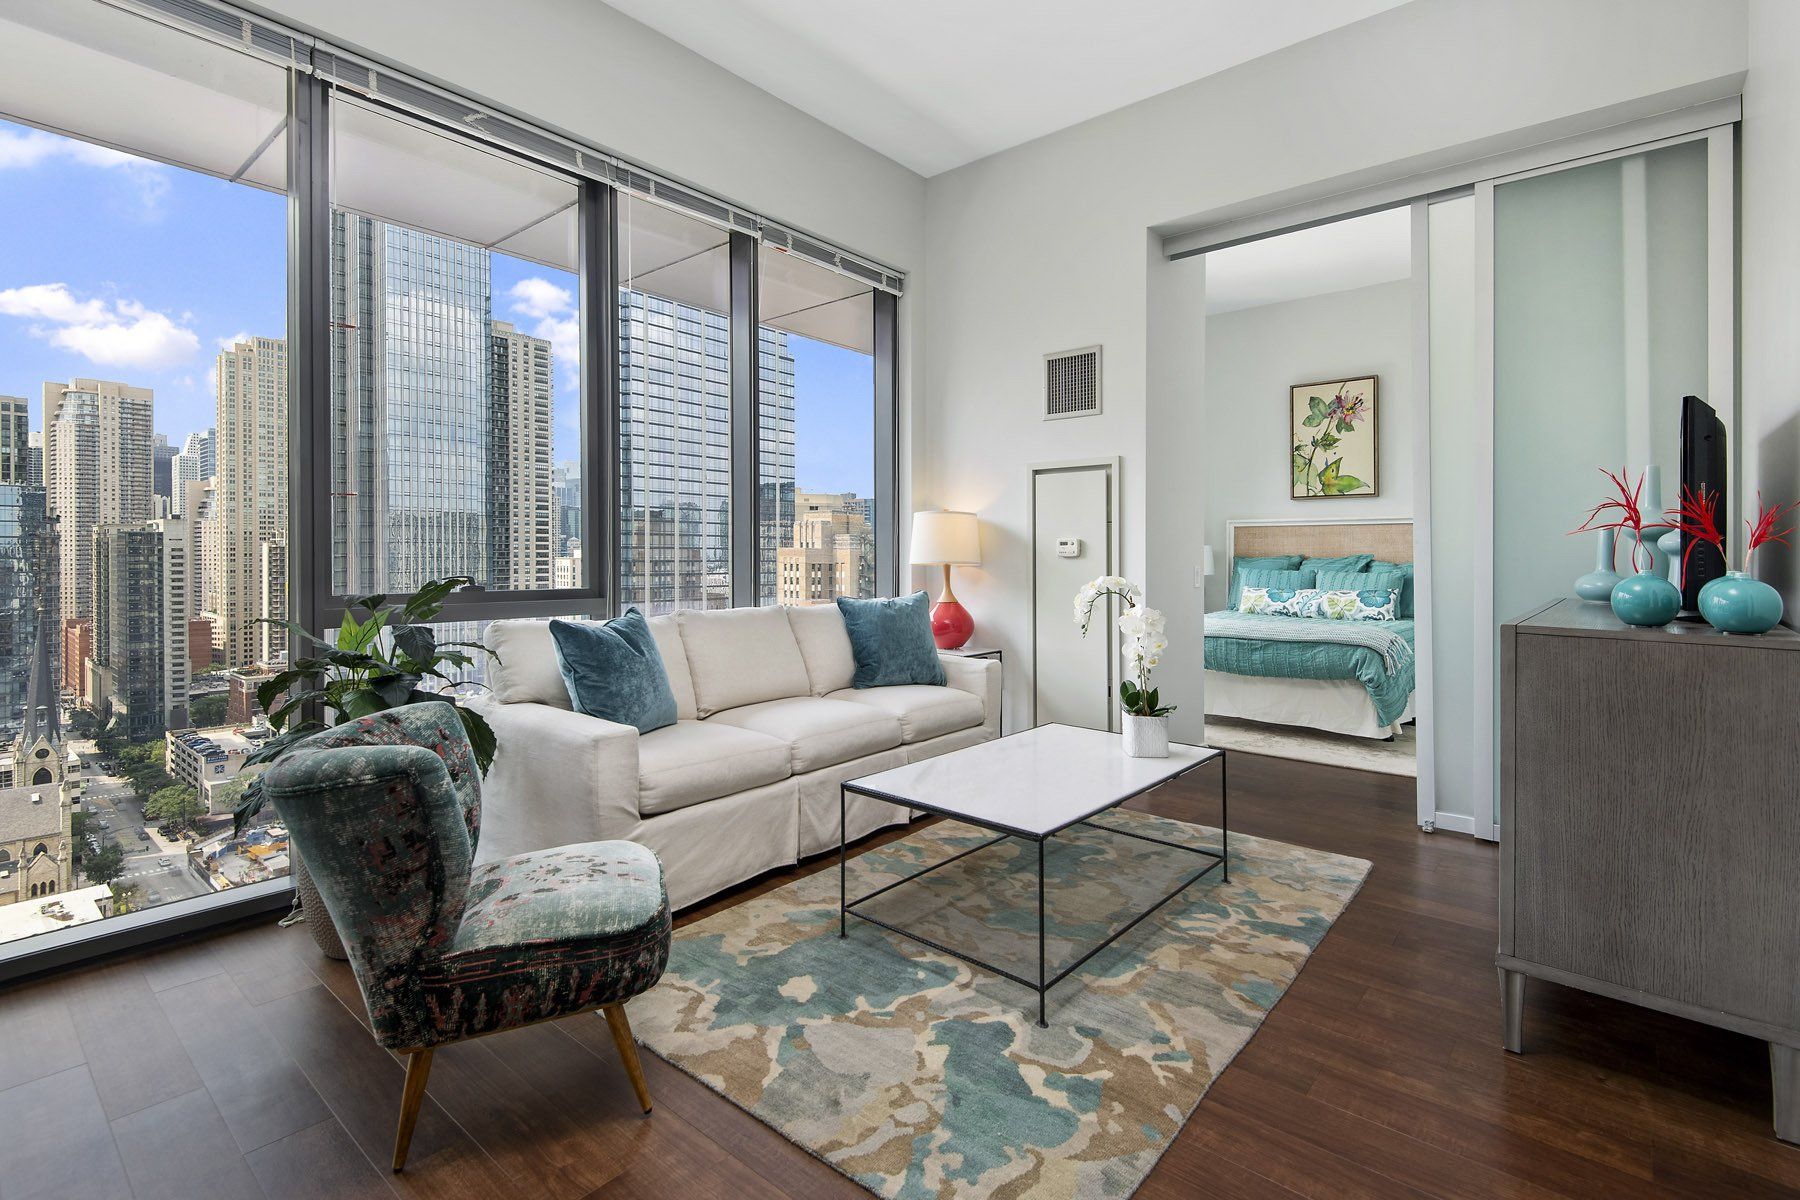 Apartment with floor to ceiling windows at State & Chestnut